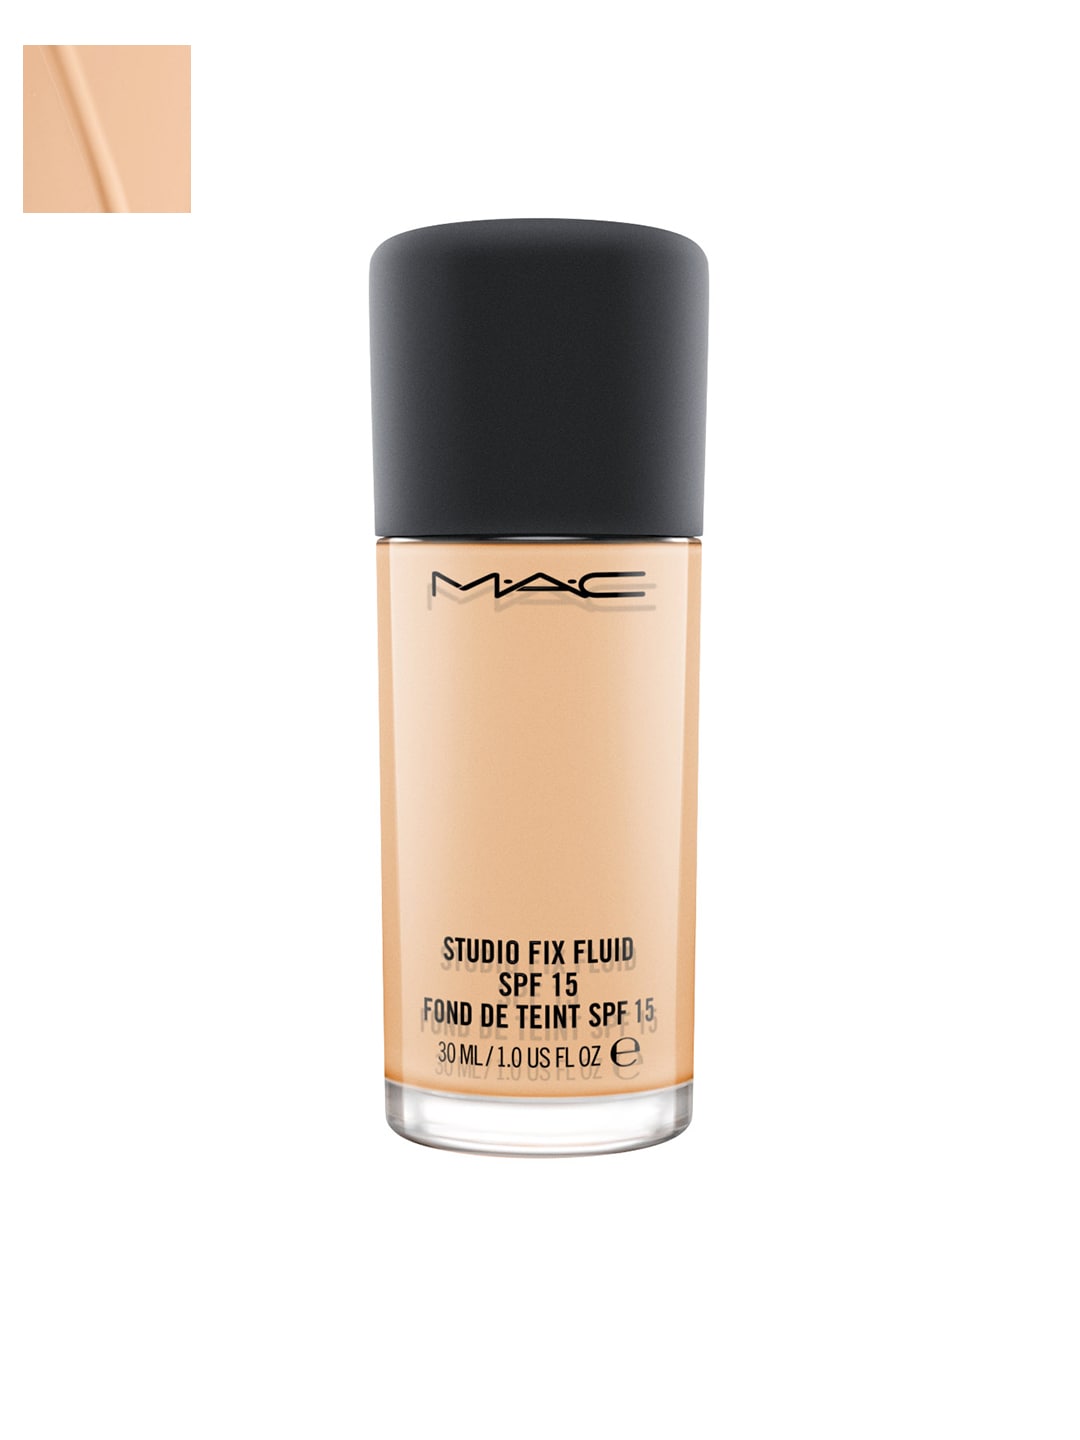 M.A.C Studio Fix Fluid Broad Spectrum Foundation with SPF 15 - NW6 30 ml Price in India